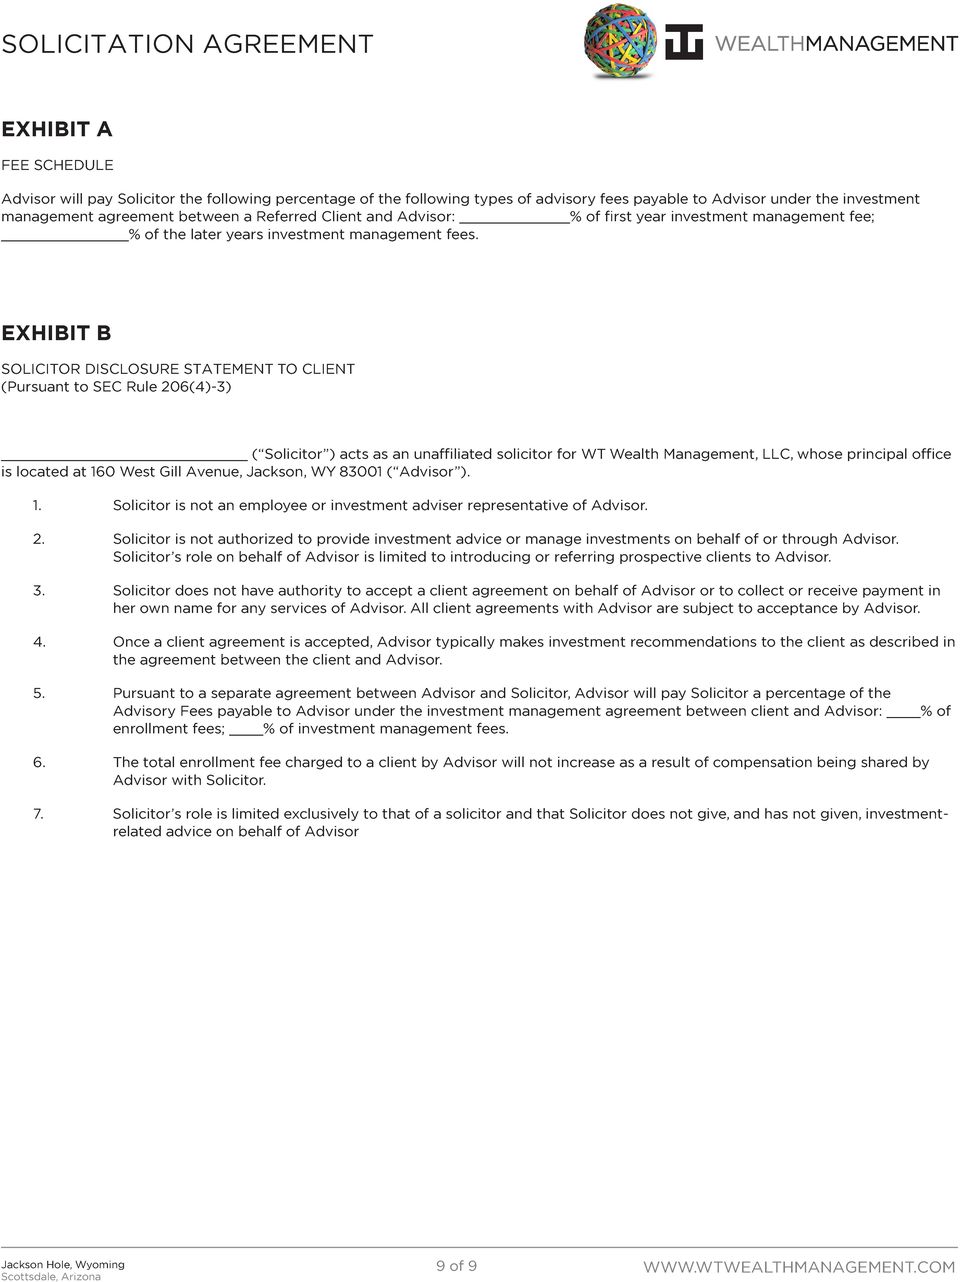 EXHIBIT B SOLICITOR DISCLOSURE STATEMENT TO CLIENT (Pursuant to SEC Rule 206(4)-3) ( Solicitor ) acts as an unaffiliated solicitor for WT Wealth Management, LLC, whose principal office is located at